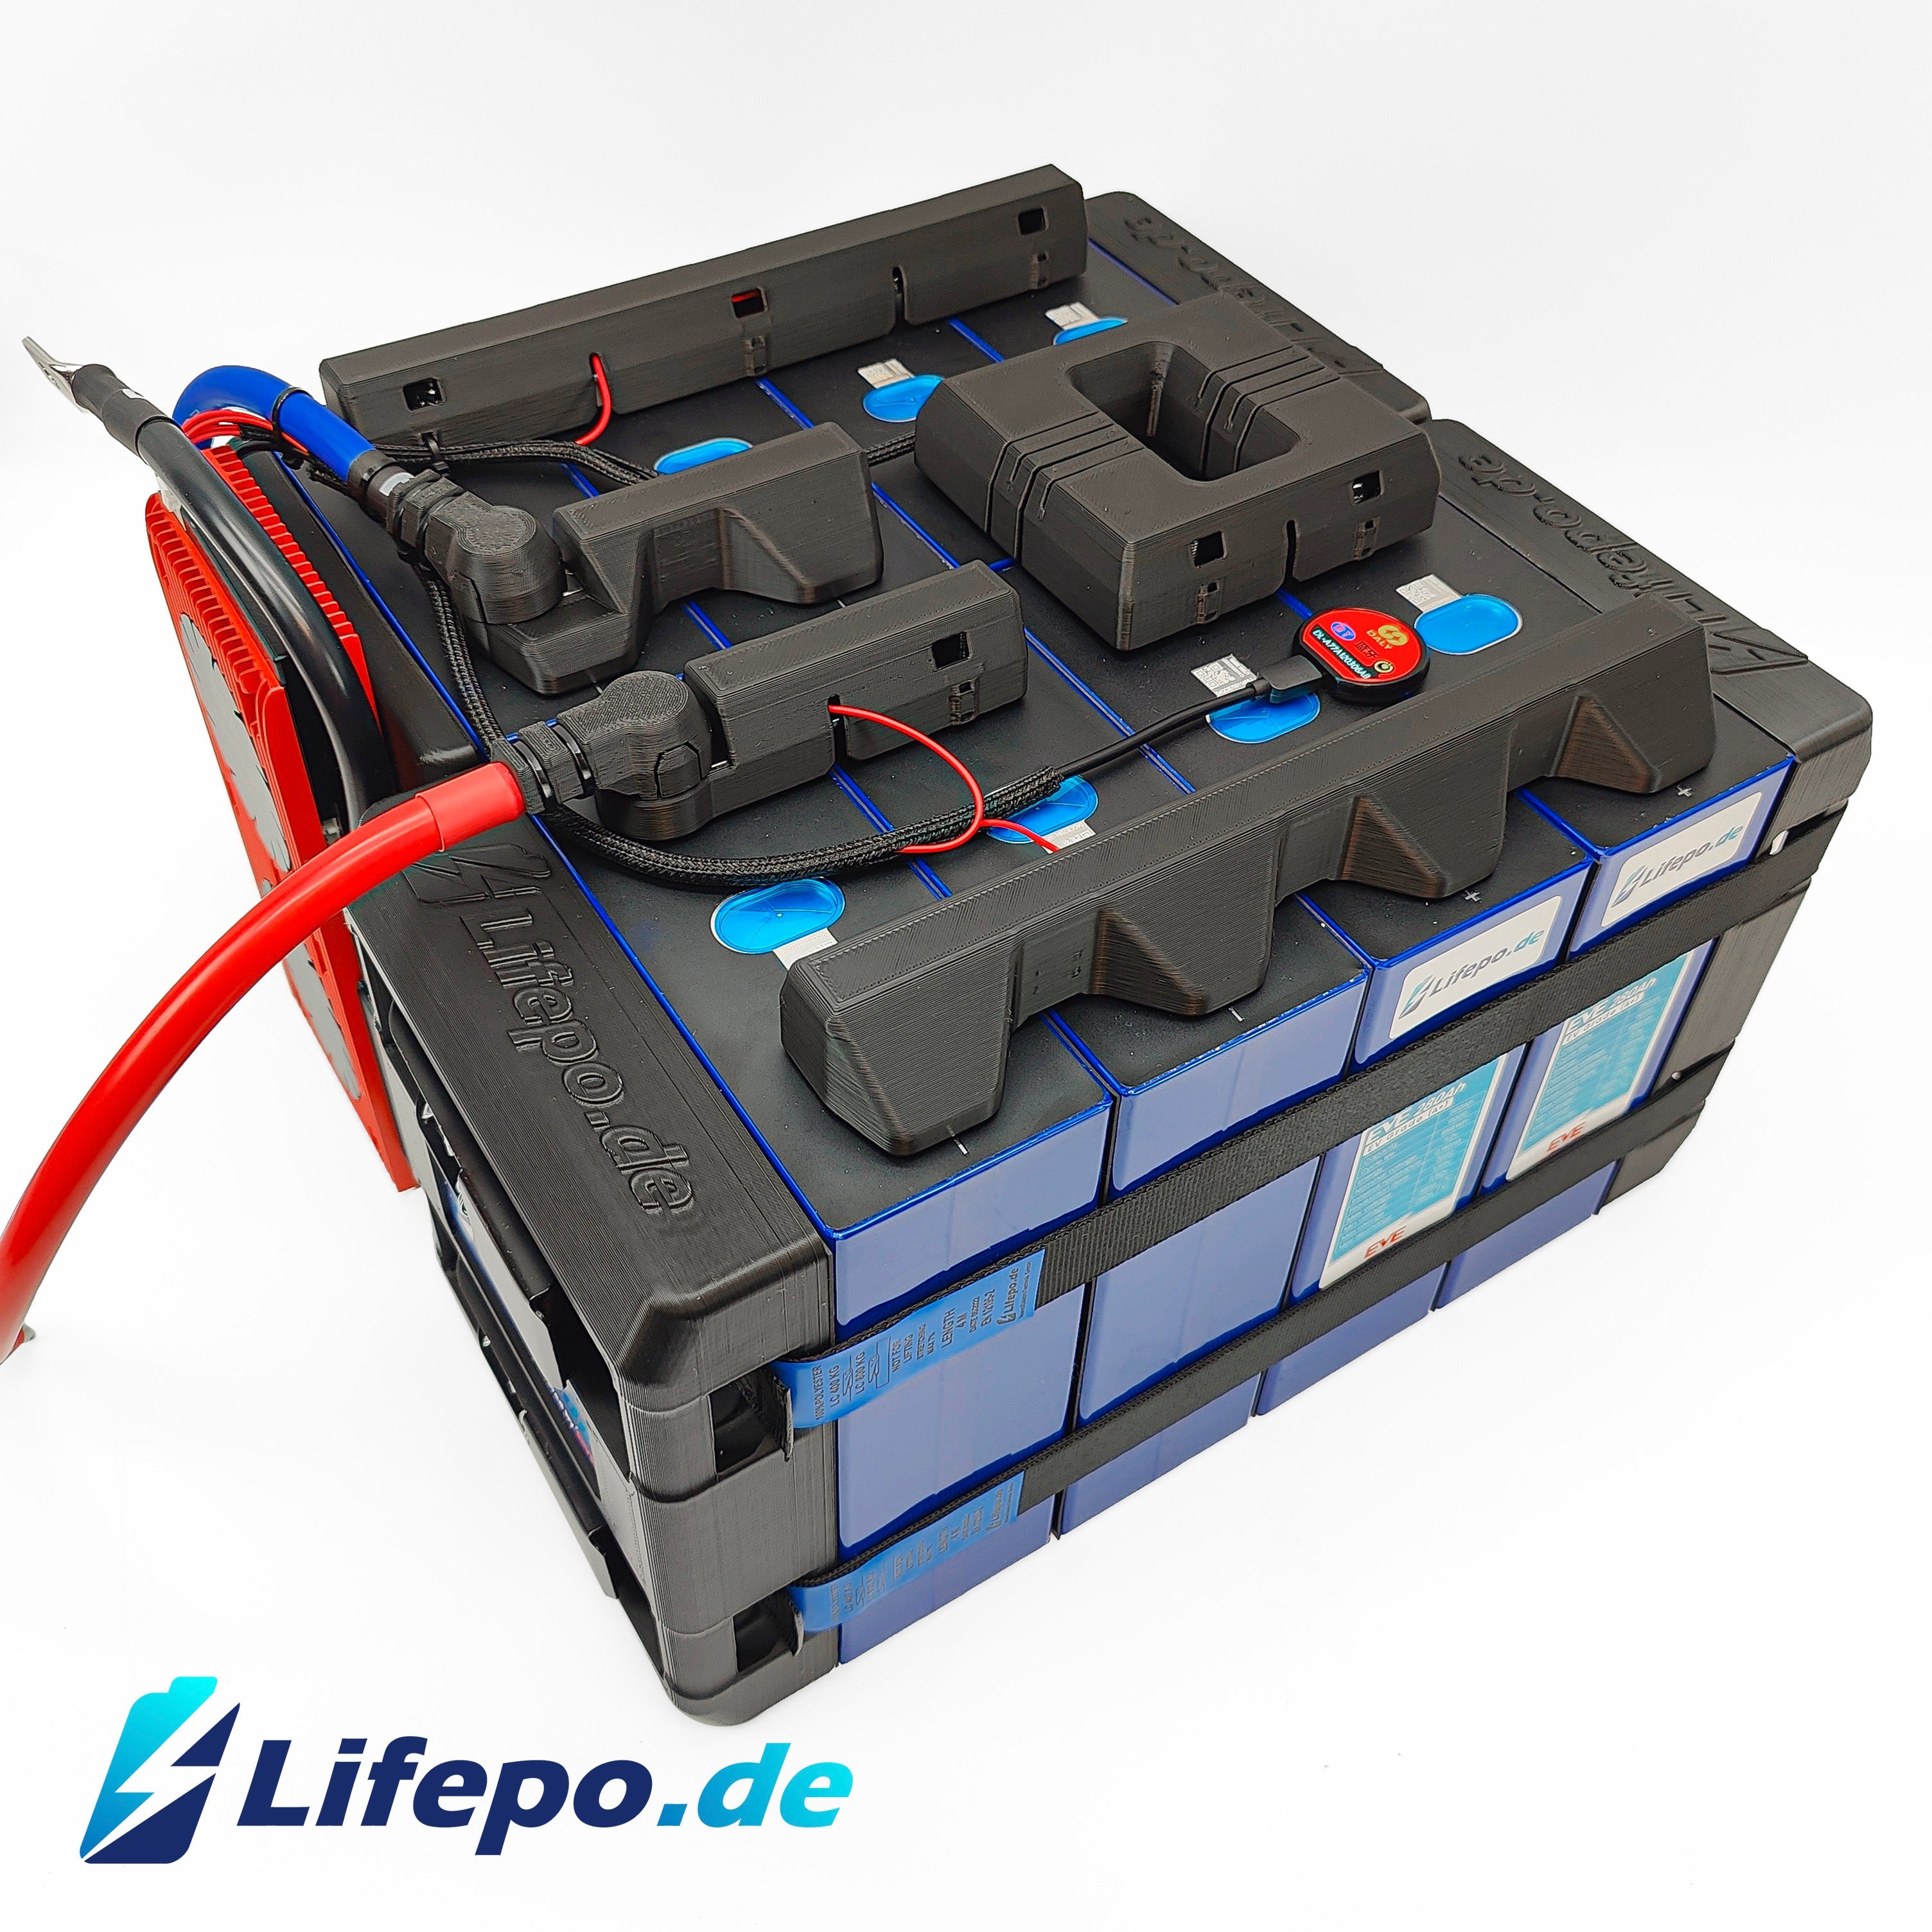 0% VAT 12v 560Ah Lifepo4 battery system with EVE Grade A+ 7.6kWh double row